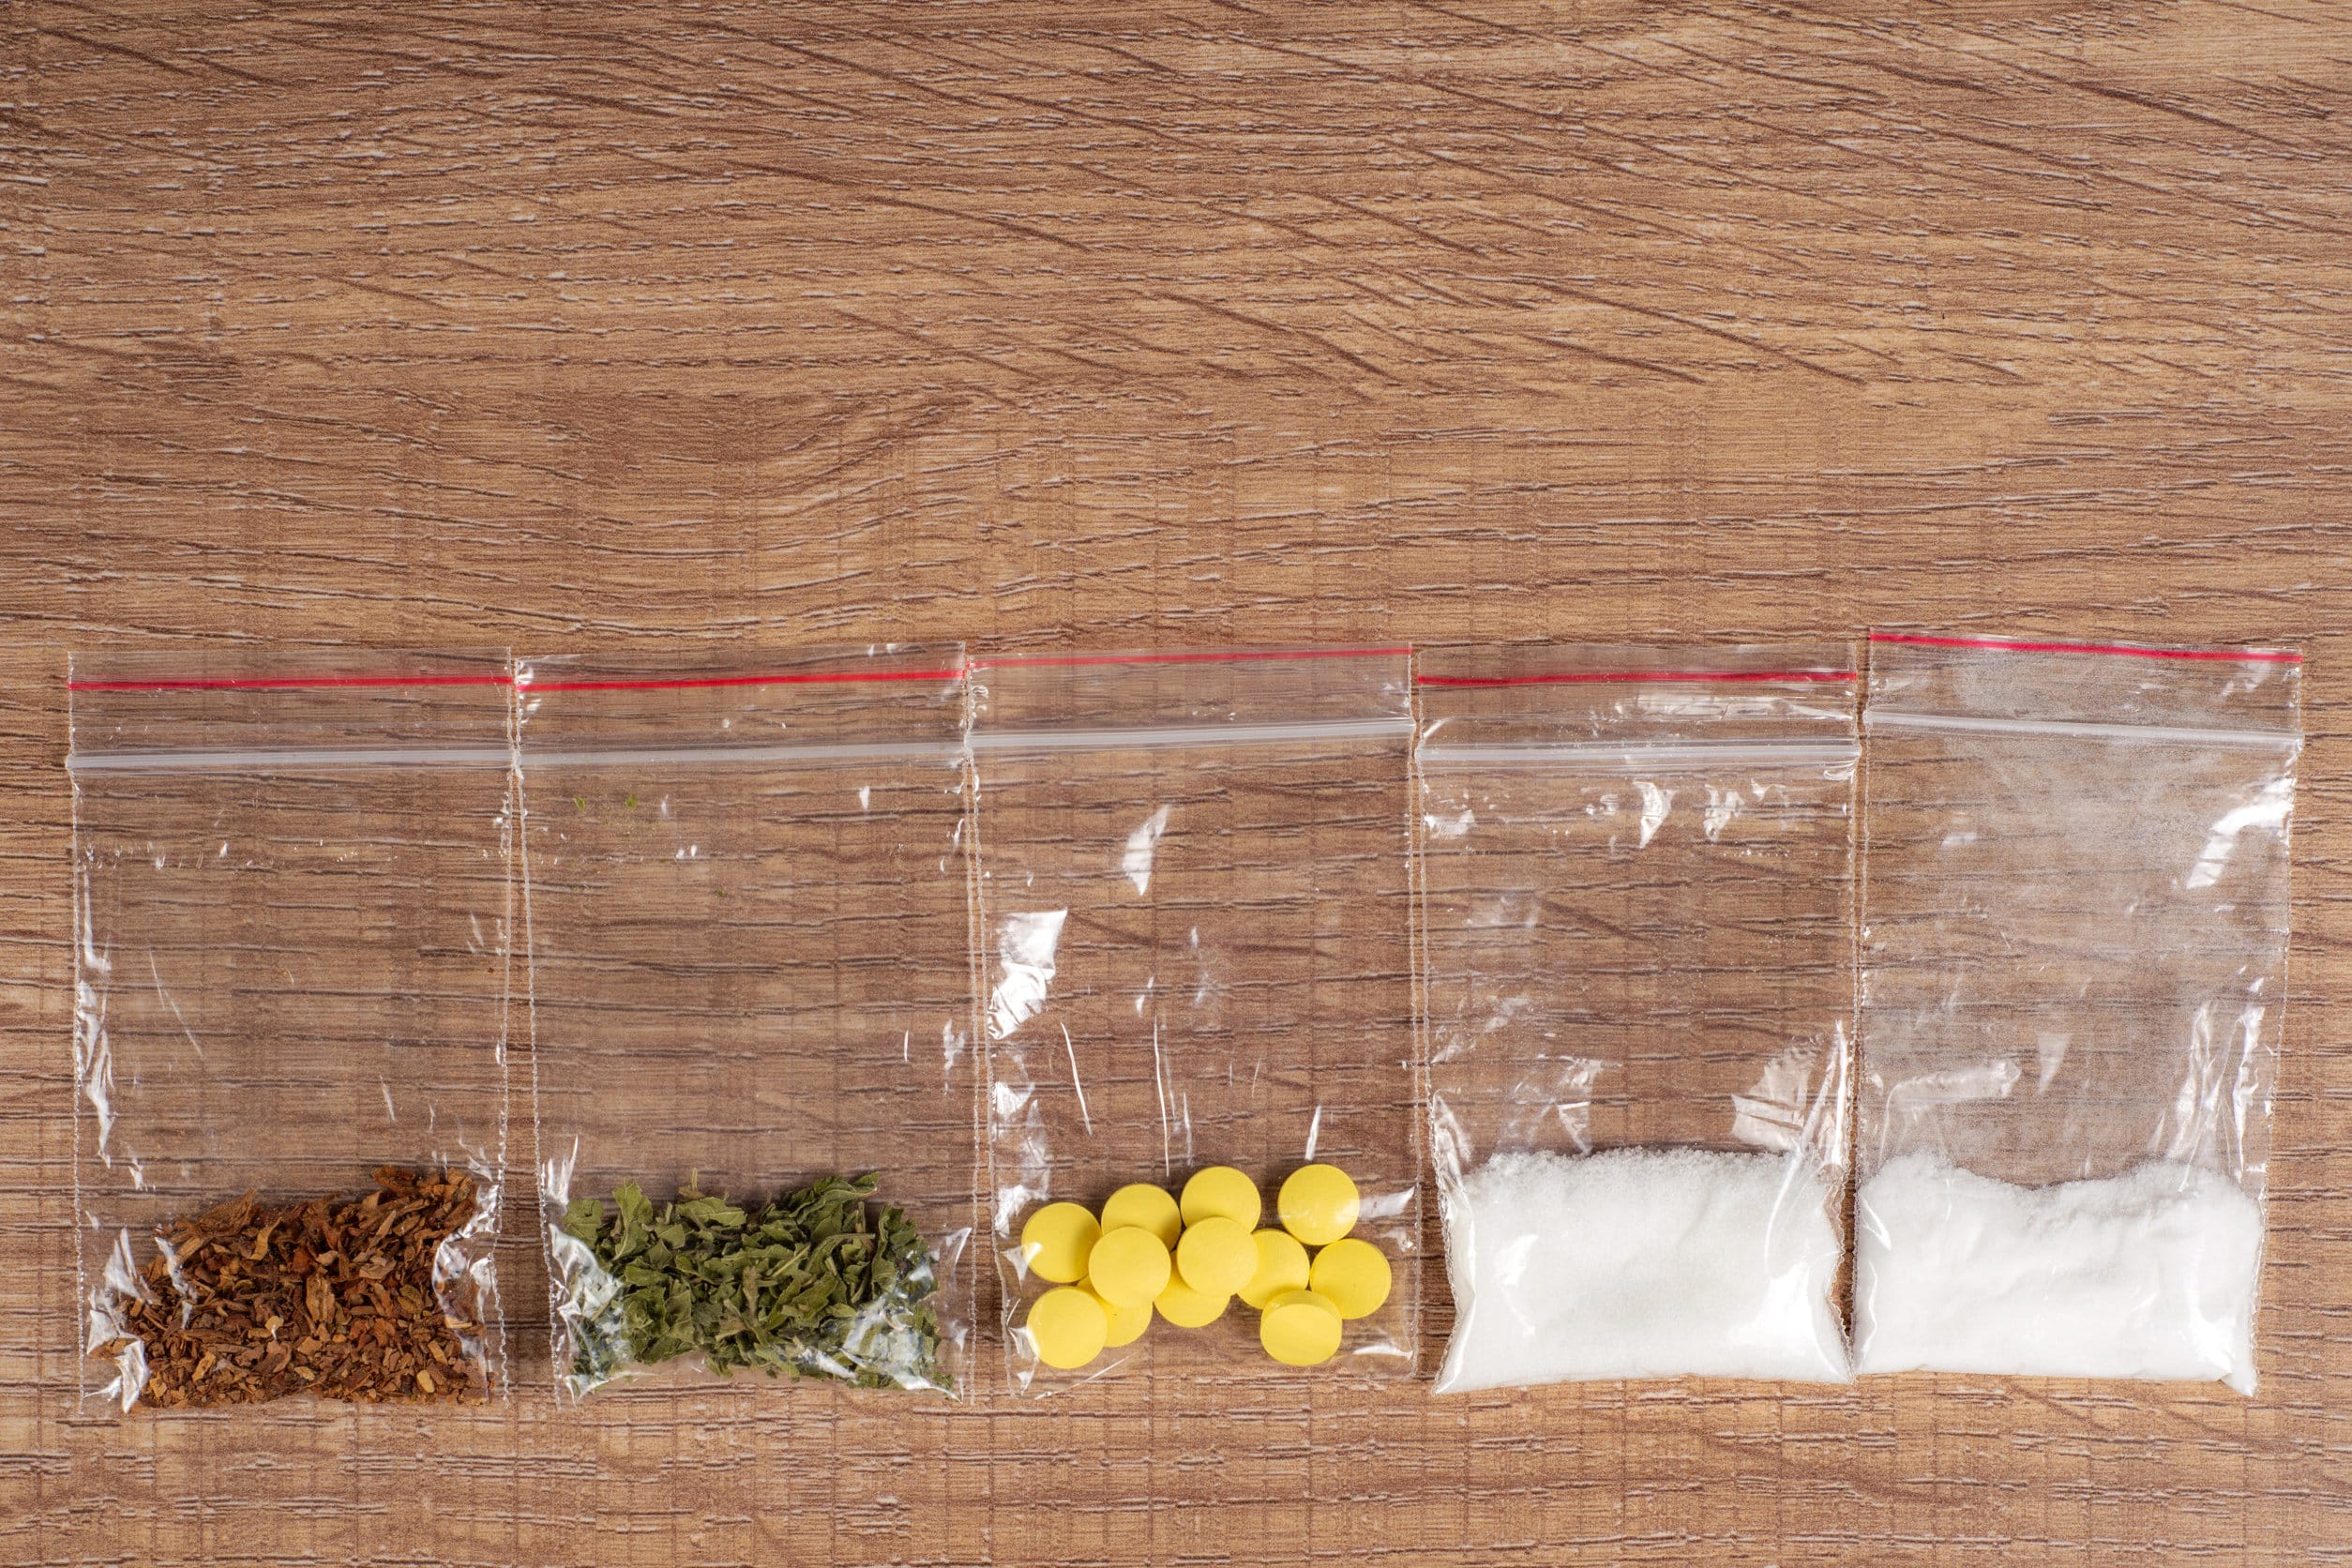 Synthetic Drugs in CO Can Send You To Prison